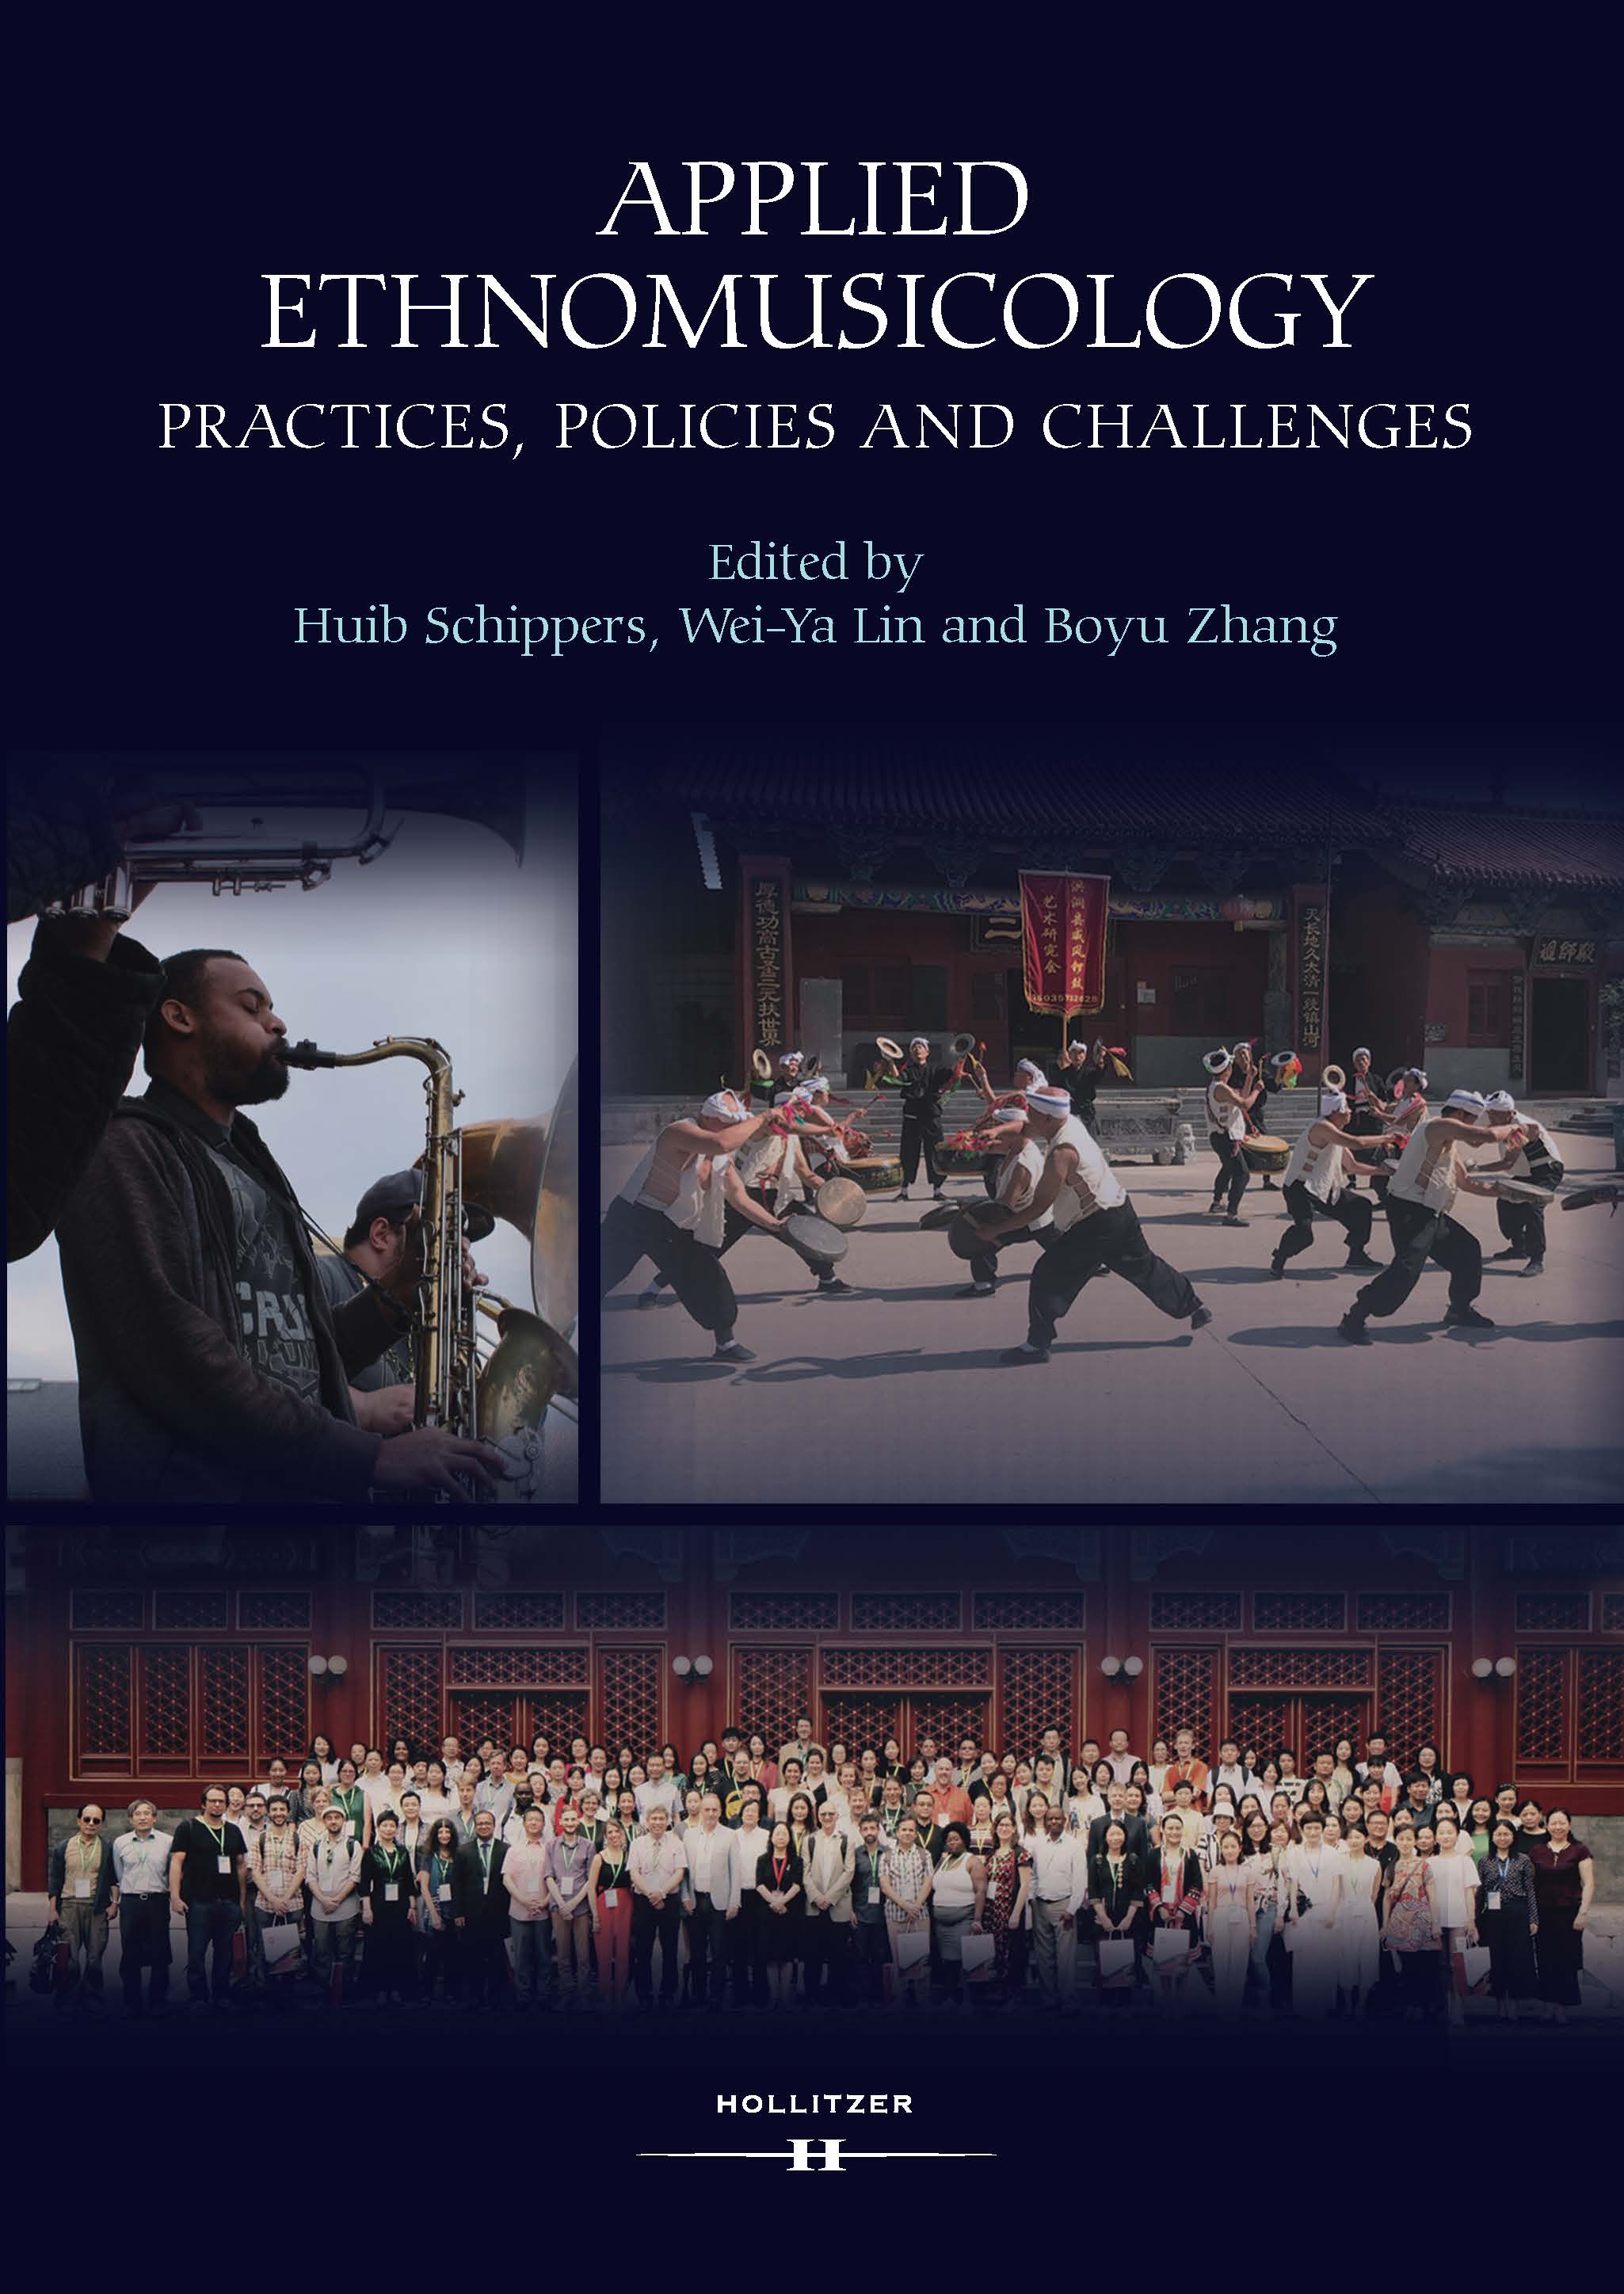 Huib Schippers, Wei-Ya Lin and Boyu Zhang (eds.): Applied Ethnomusicology. Practices, Policies and Challenges